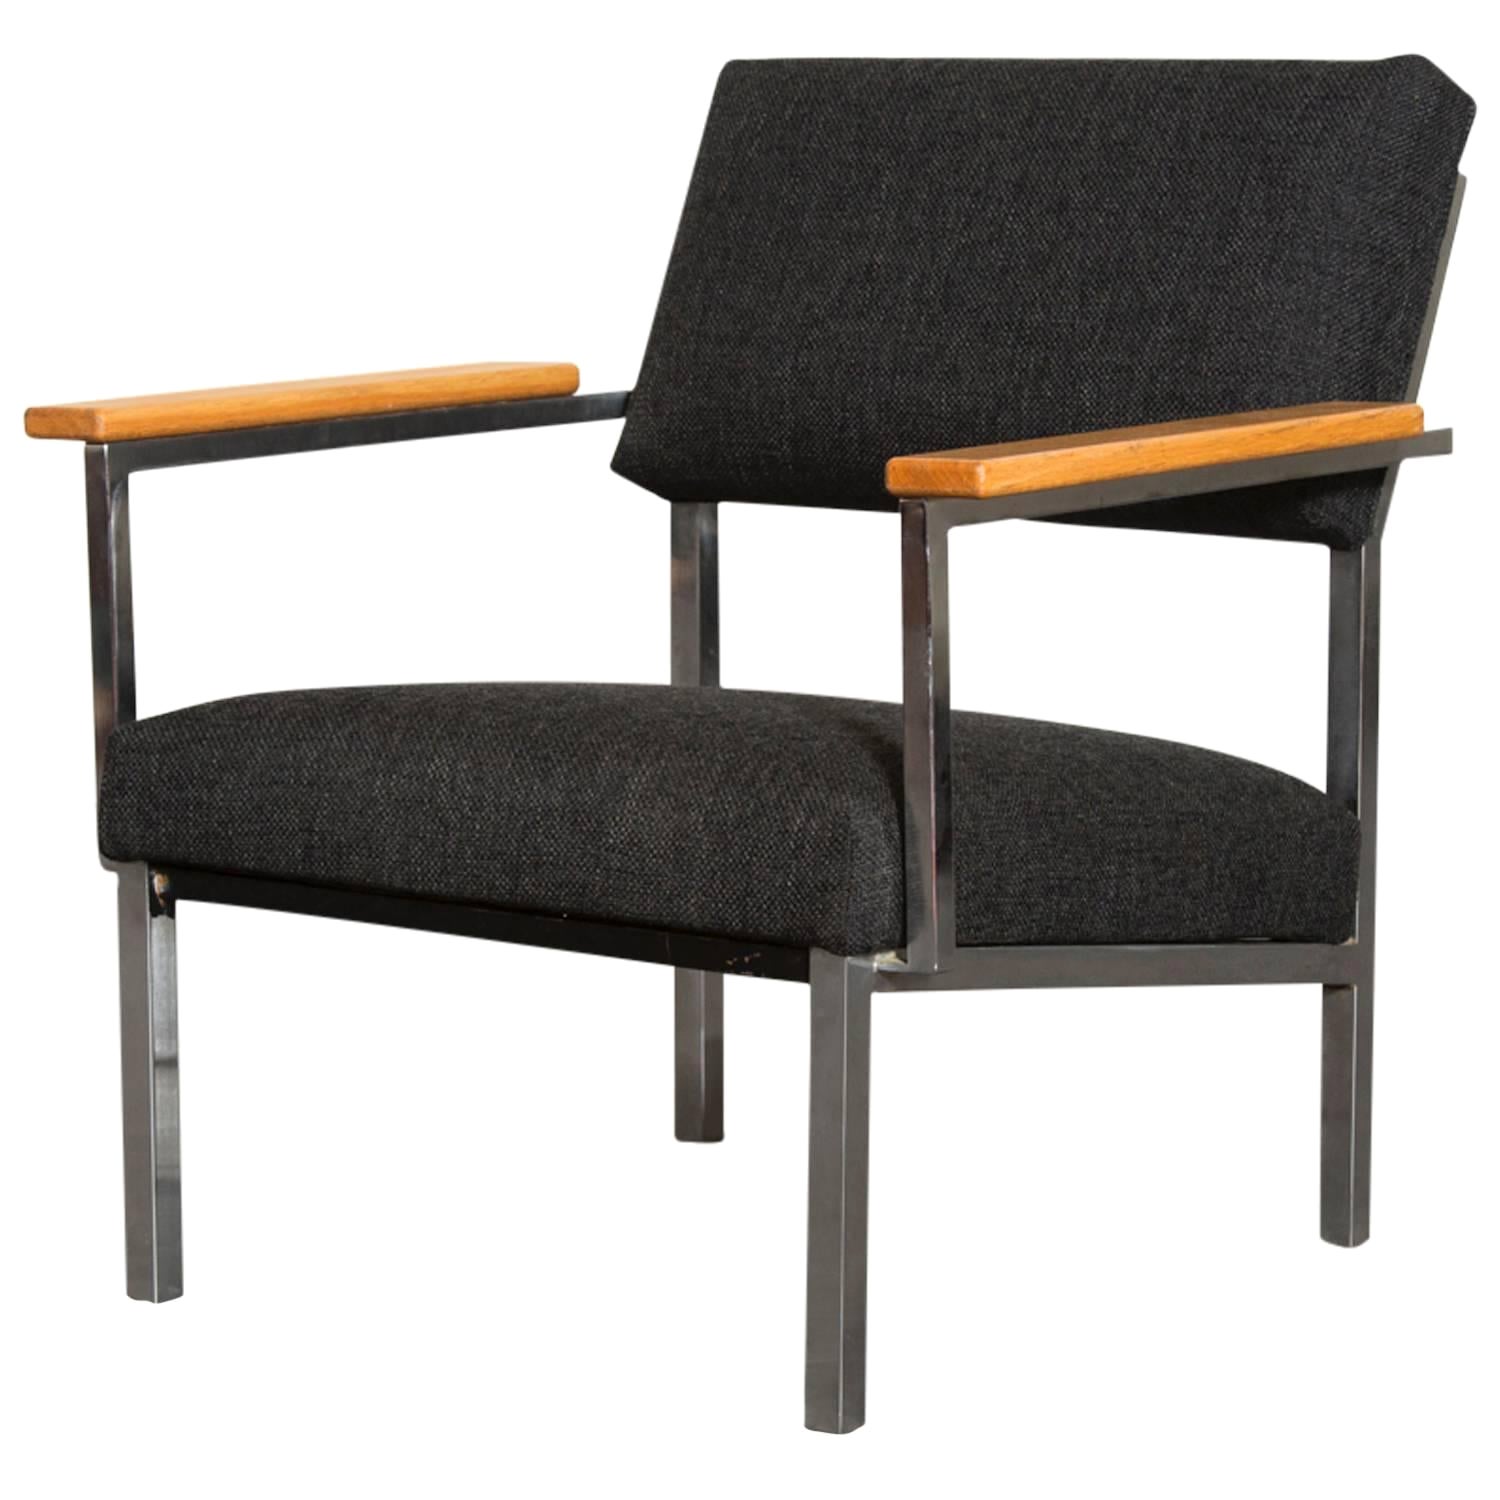  Mid-Century Martin Visser Lounge Chair in Charcoal and Chrome  For Sale